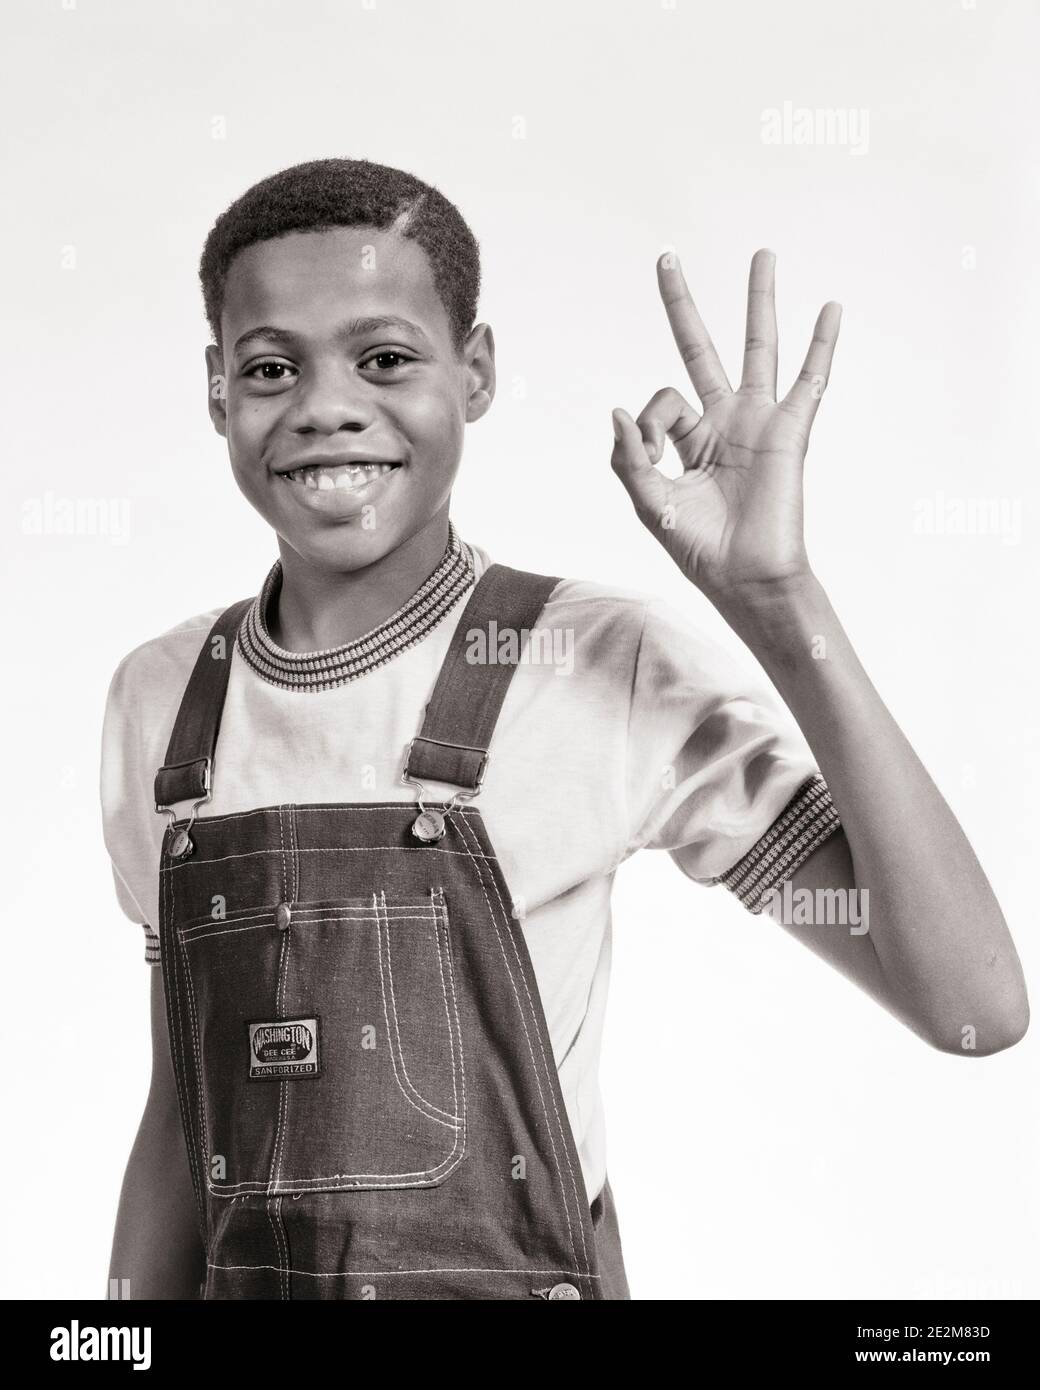 1970s SMILING AFRICAN-AMERICAN PRE-TEEN BOY WEARING BIB OVERALLS MAKING OKAY SIGN WITH HAND LOOKING AT CAMERA - b25650 HAR001 HARS MALES OK TEENAGE BOY DENIM GESTURING B&W EYE CONTACT DREAMS HAPPINESS CHEERFUL AFRICAN-AMERICANS AFRICAN-AMERICAN OKAY BLACK ETHNICITY GESTURES SMILES CONCEPTUAL JOYFUL BIB FINE INFORMAL JUVENILES OKEY-DOKEY PRE-TEEN PRE-TEEN BOY TWILL BLACK AND WHITE CASUAL HAR001 OLD FASHIONED AFRICAN AMERICANS Stock Photo